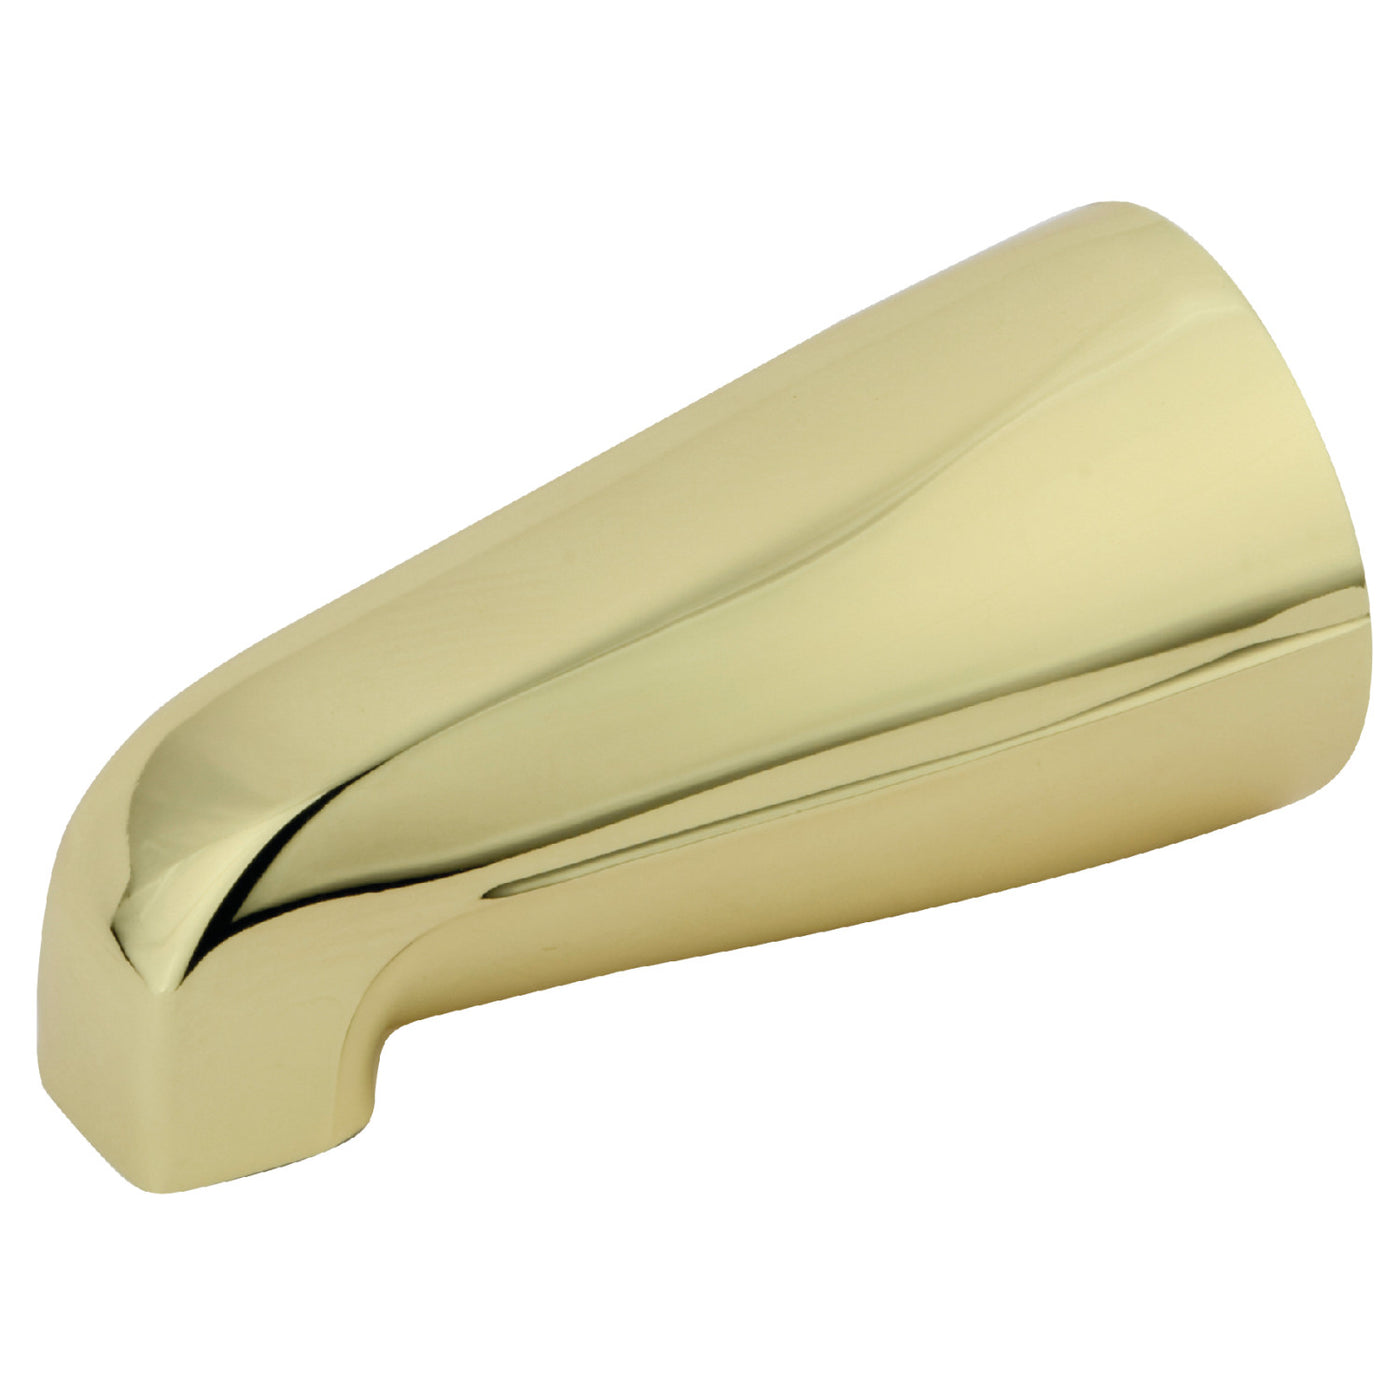 Elements of Design DK187A2 5-1/4 Inch Tub Spout, Polished Brass